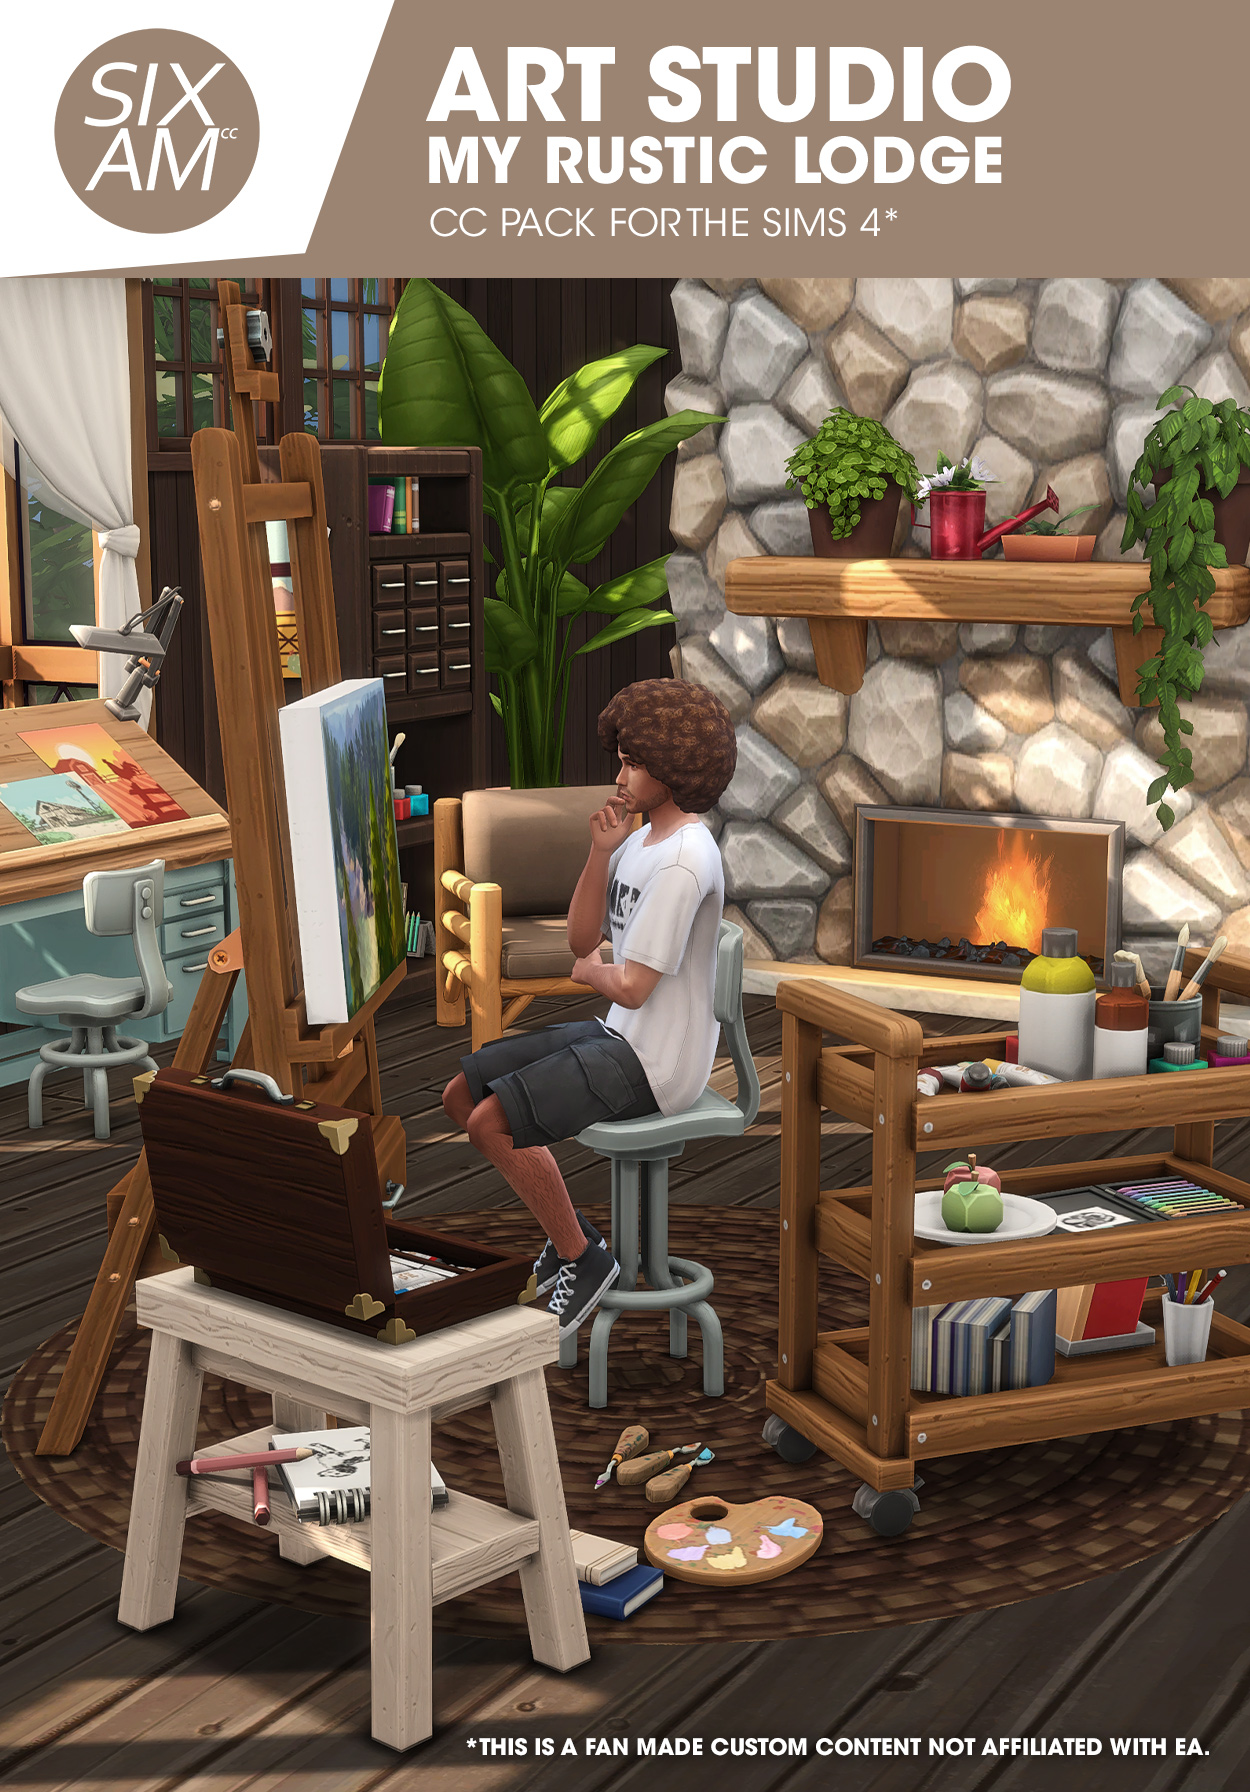 Art Studio My Rustic Lodge (CC Pack for The Sims 4)